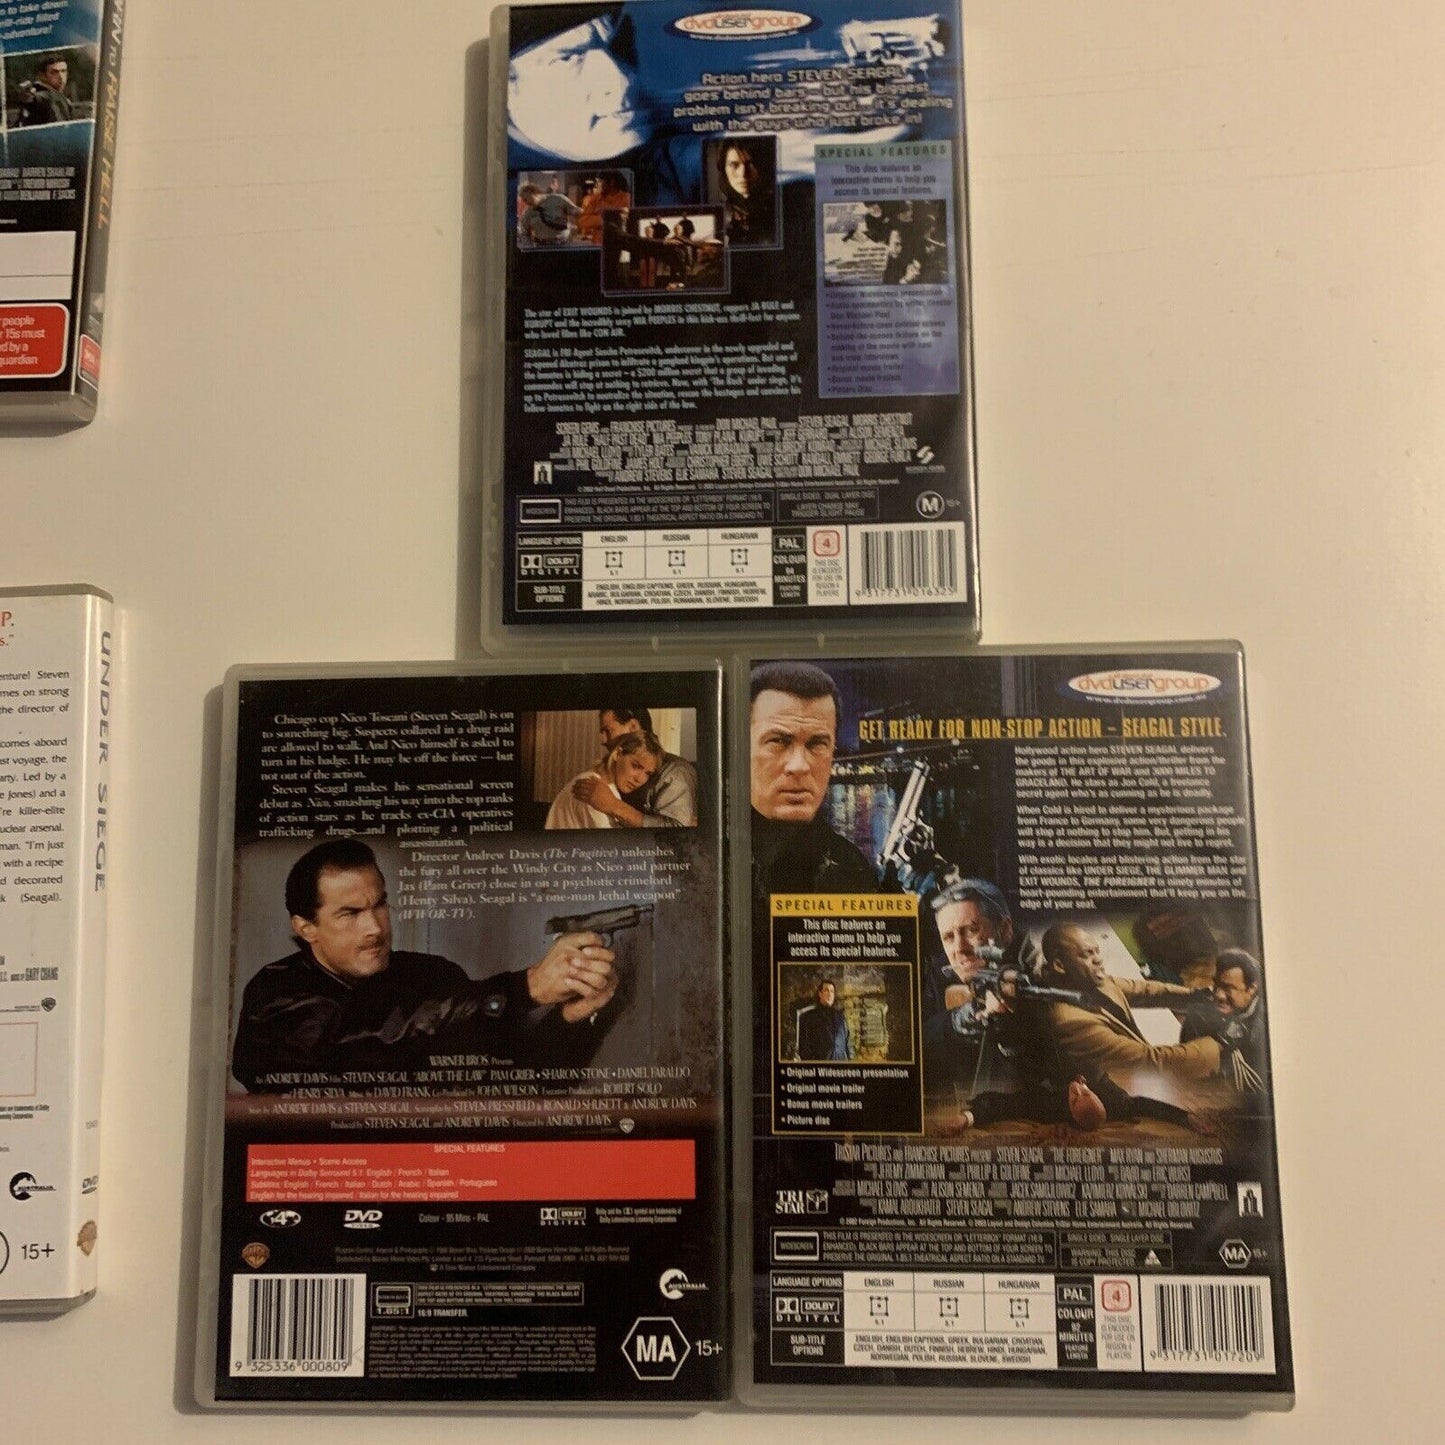 7x Steven Seagal DVDs Out for a Kill / Born To Raise Hell / Half Past Region 4